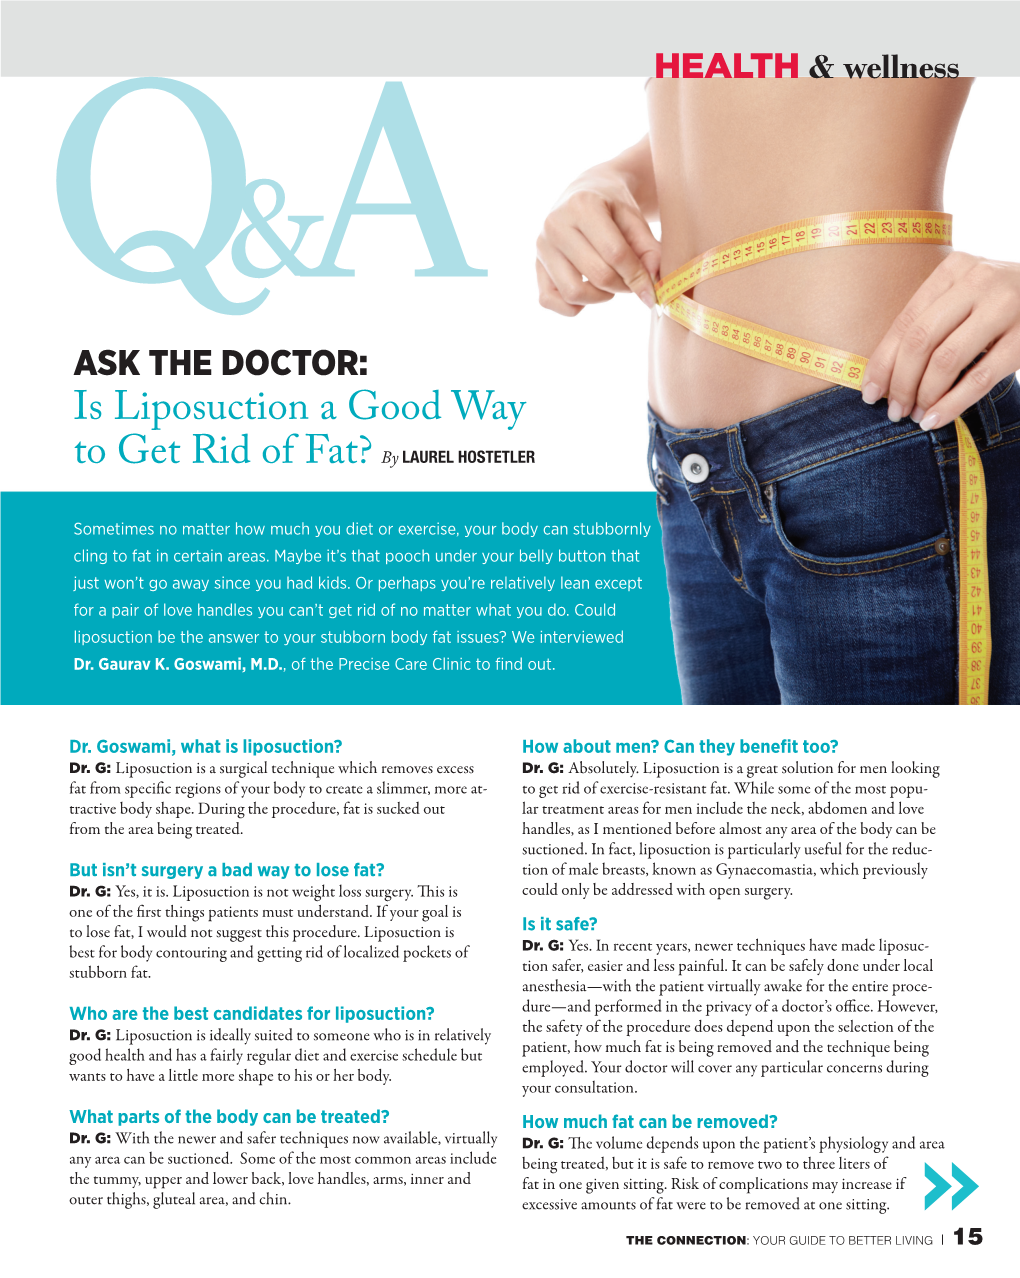 Is Liposuction a Good Way to Get Rid of Fat? by LAUREL HOSTETLER